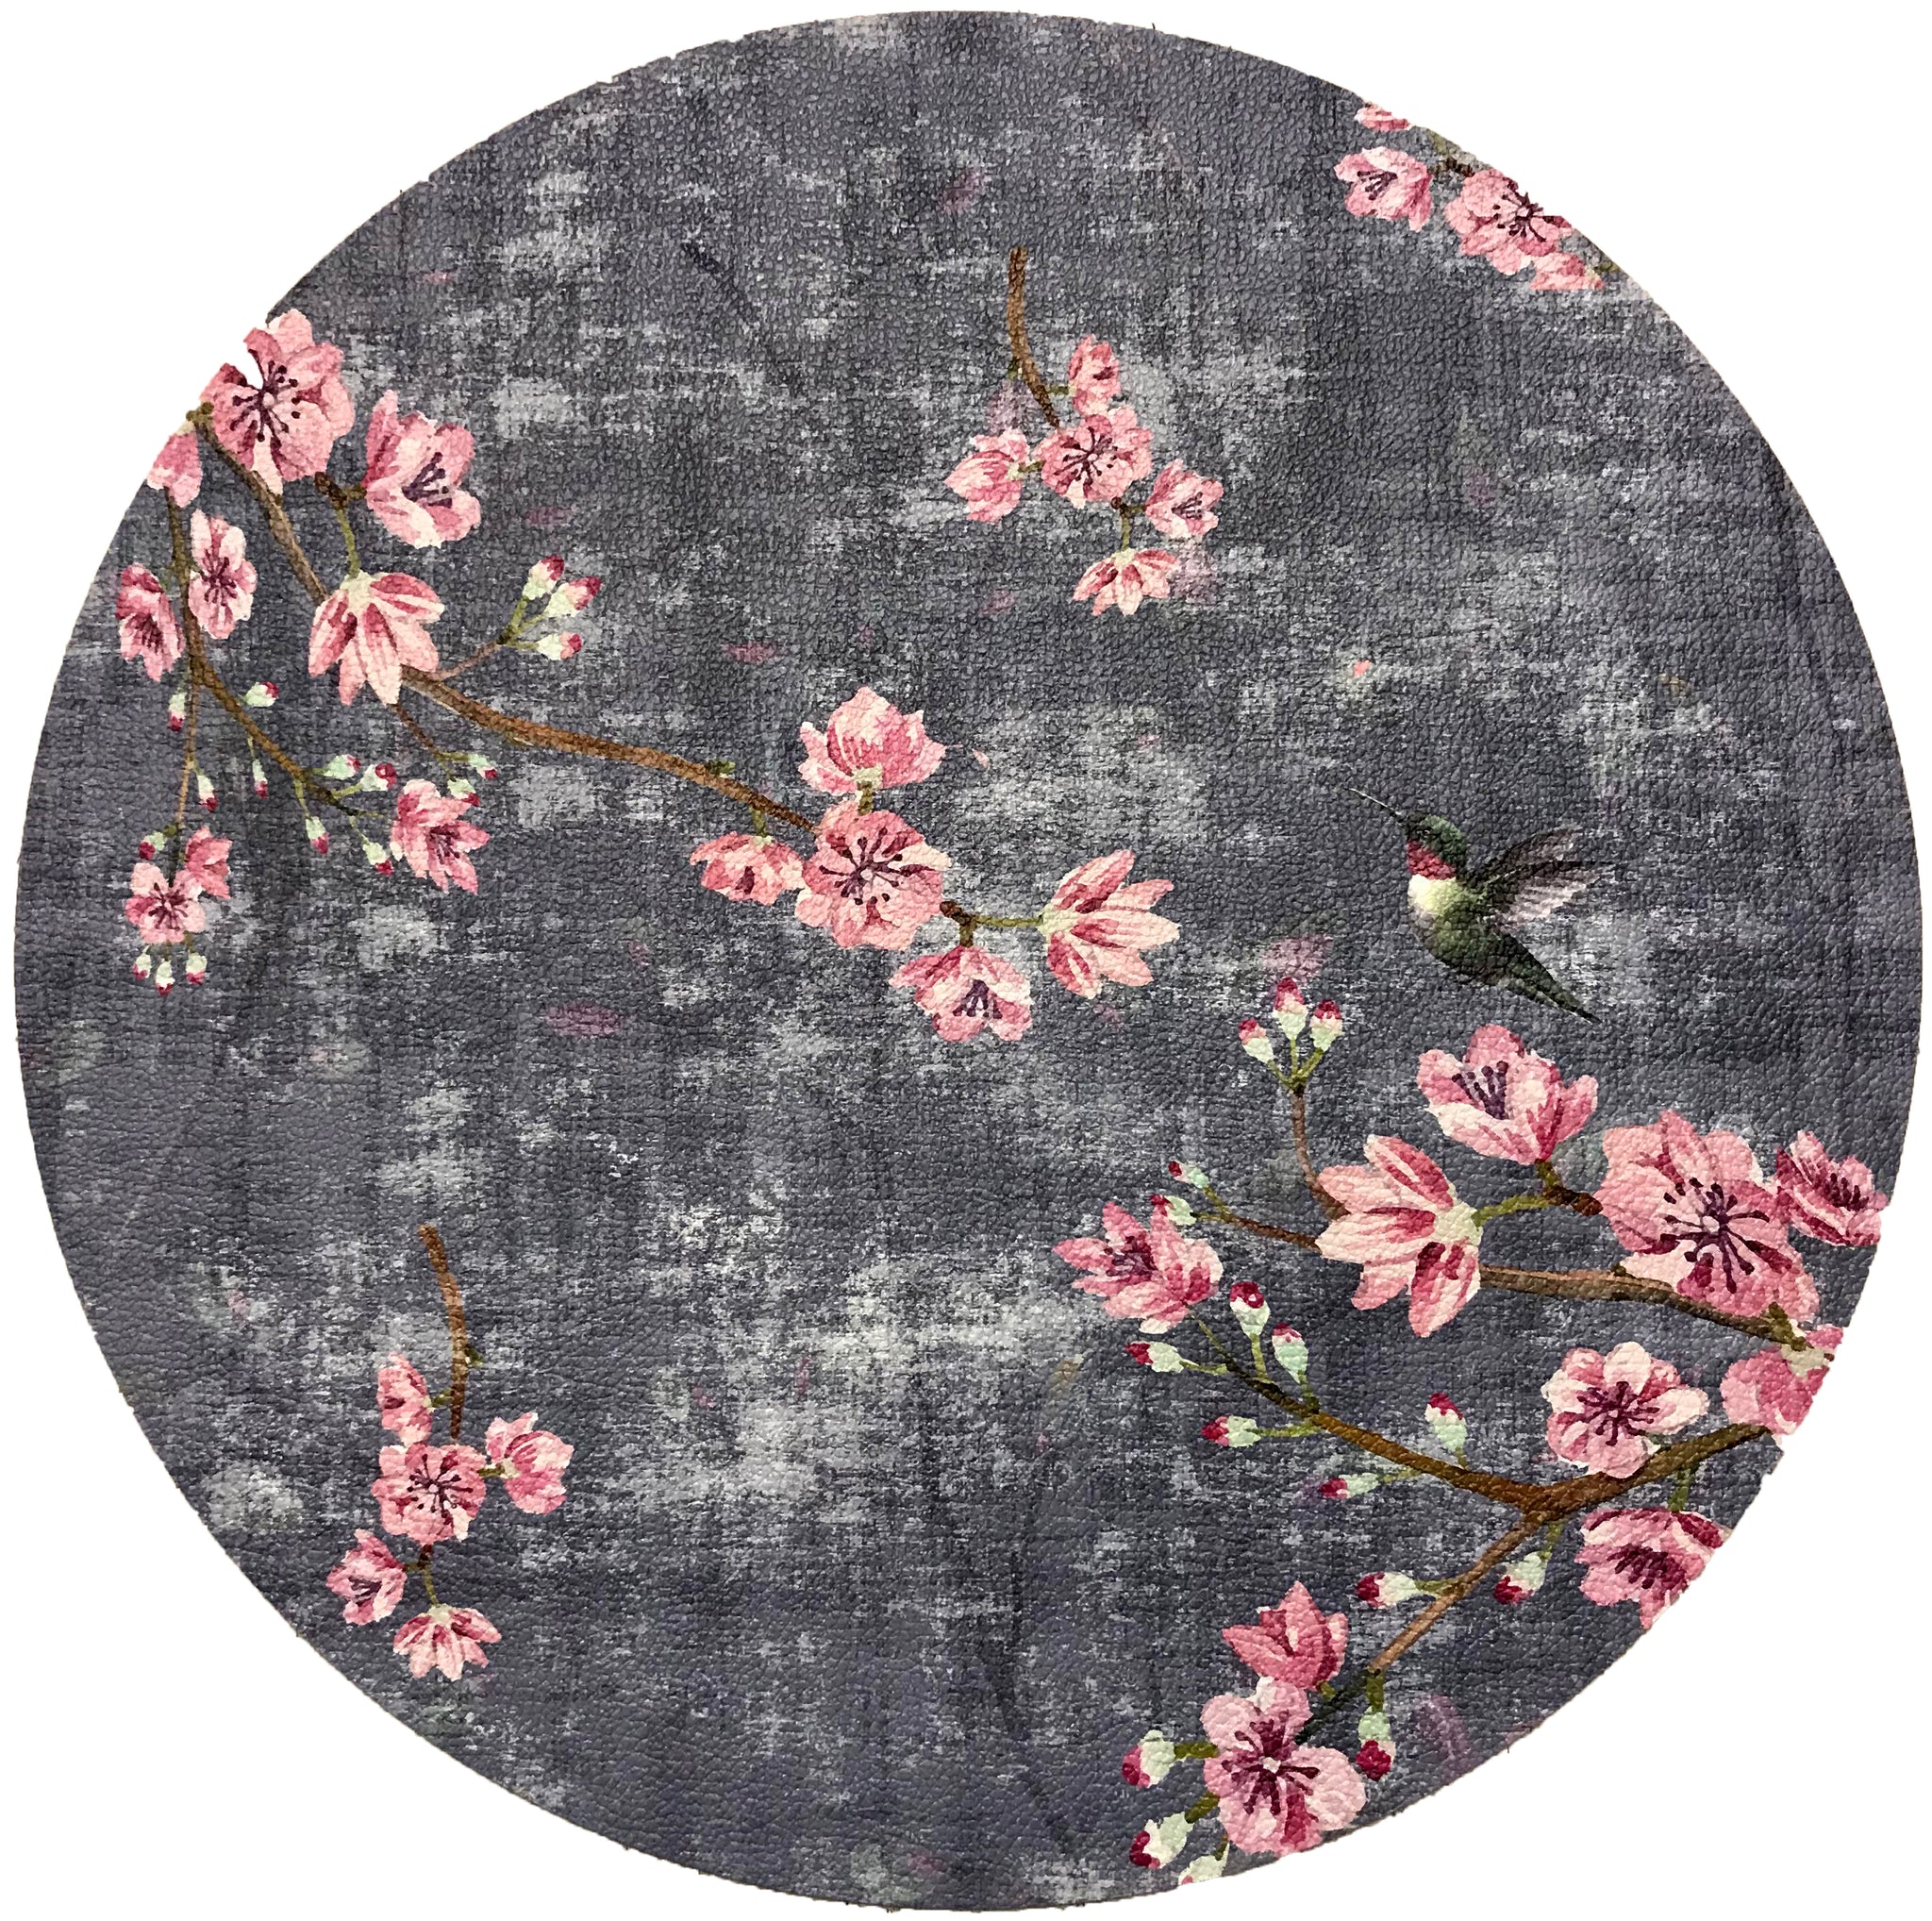 Blossom Fantasia Charcoal 16" Round Pebble Placemats, Set Of 4 - nicolettemayer.com